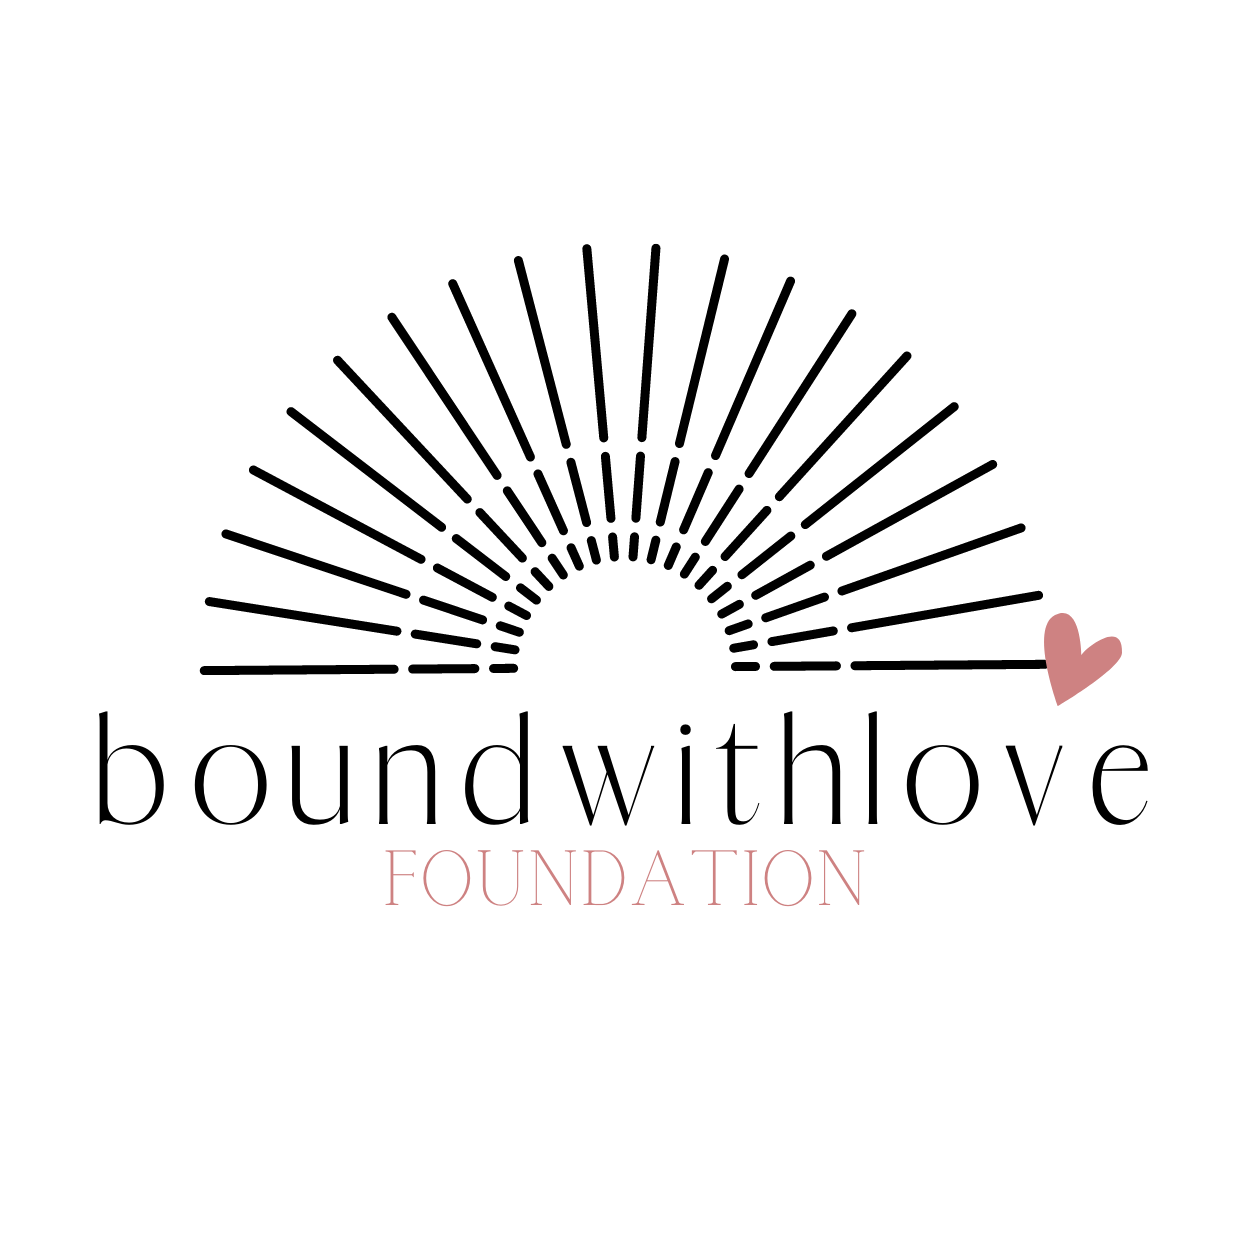 Bound With Love Foundation